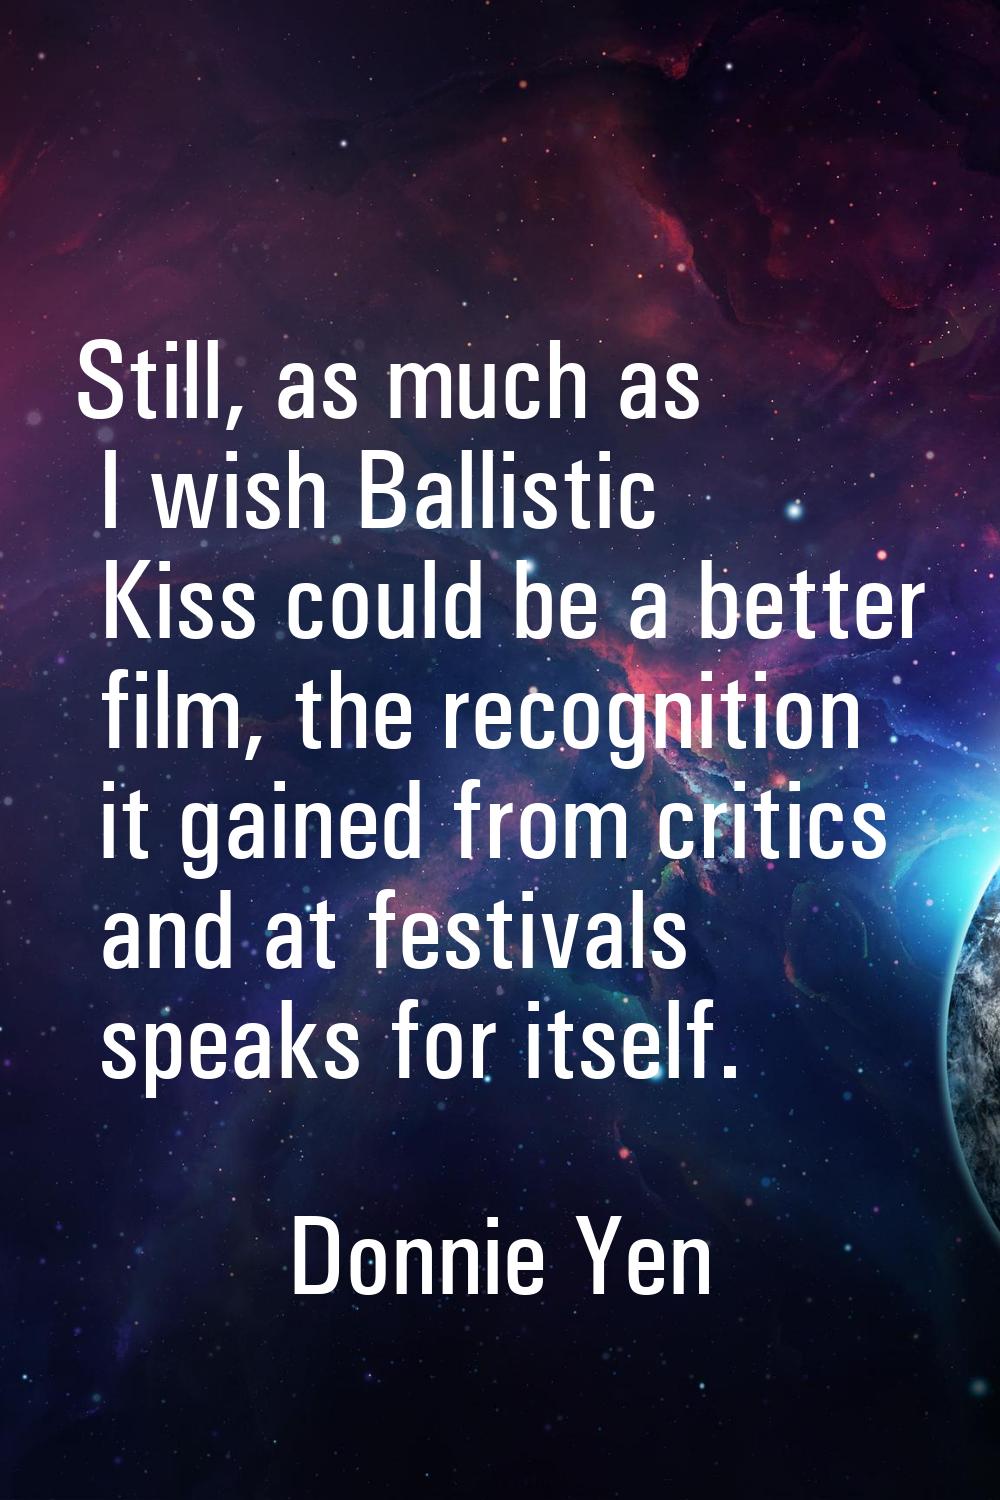 Still, as much as I wish Ballistic Kiss could be a better film, the recognition it gained from crit